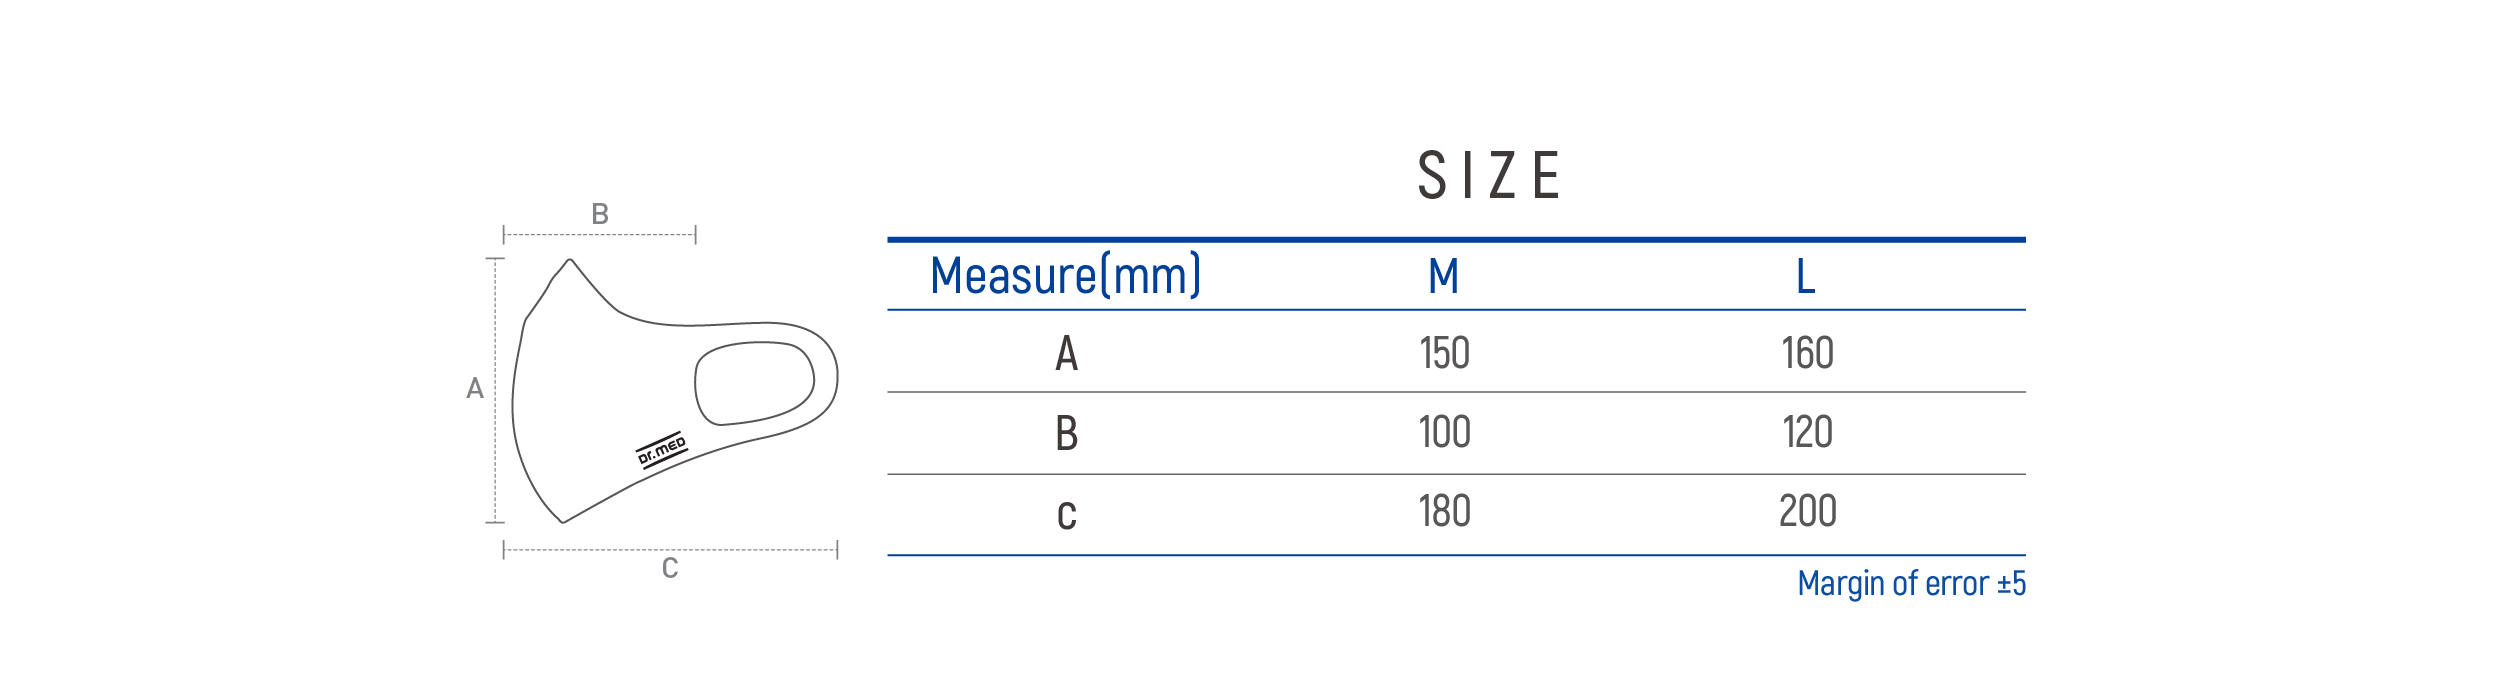 DR-M501 Size table image